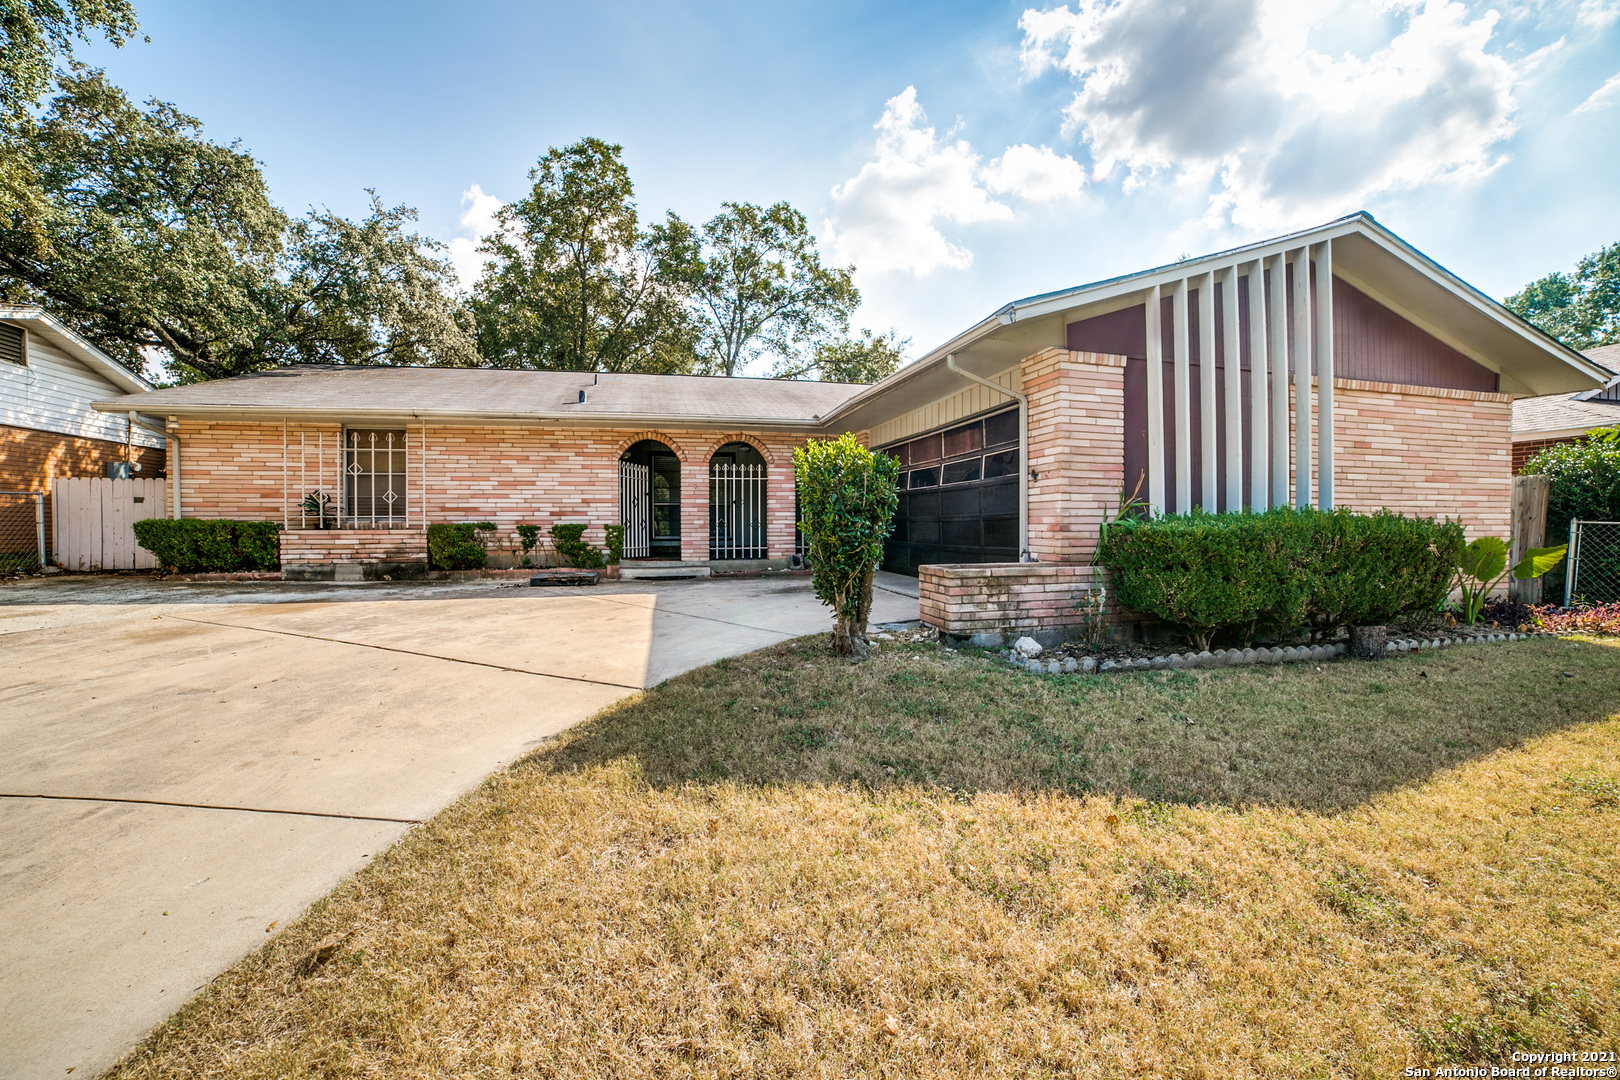 Spacious 3/2 bath 2 car garage with an attached 250 sq ft Sunroom. Centrally located, home has a large courtyard in front, open floor plan. Enjoy the large covered backyard with mature pecan trees.